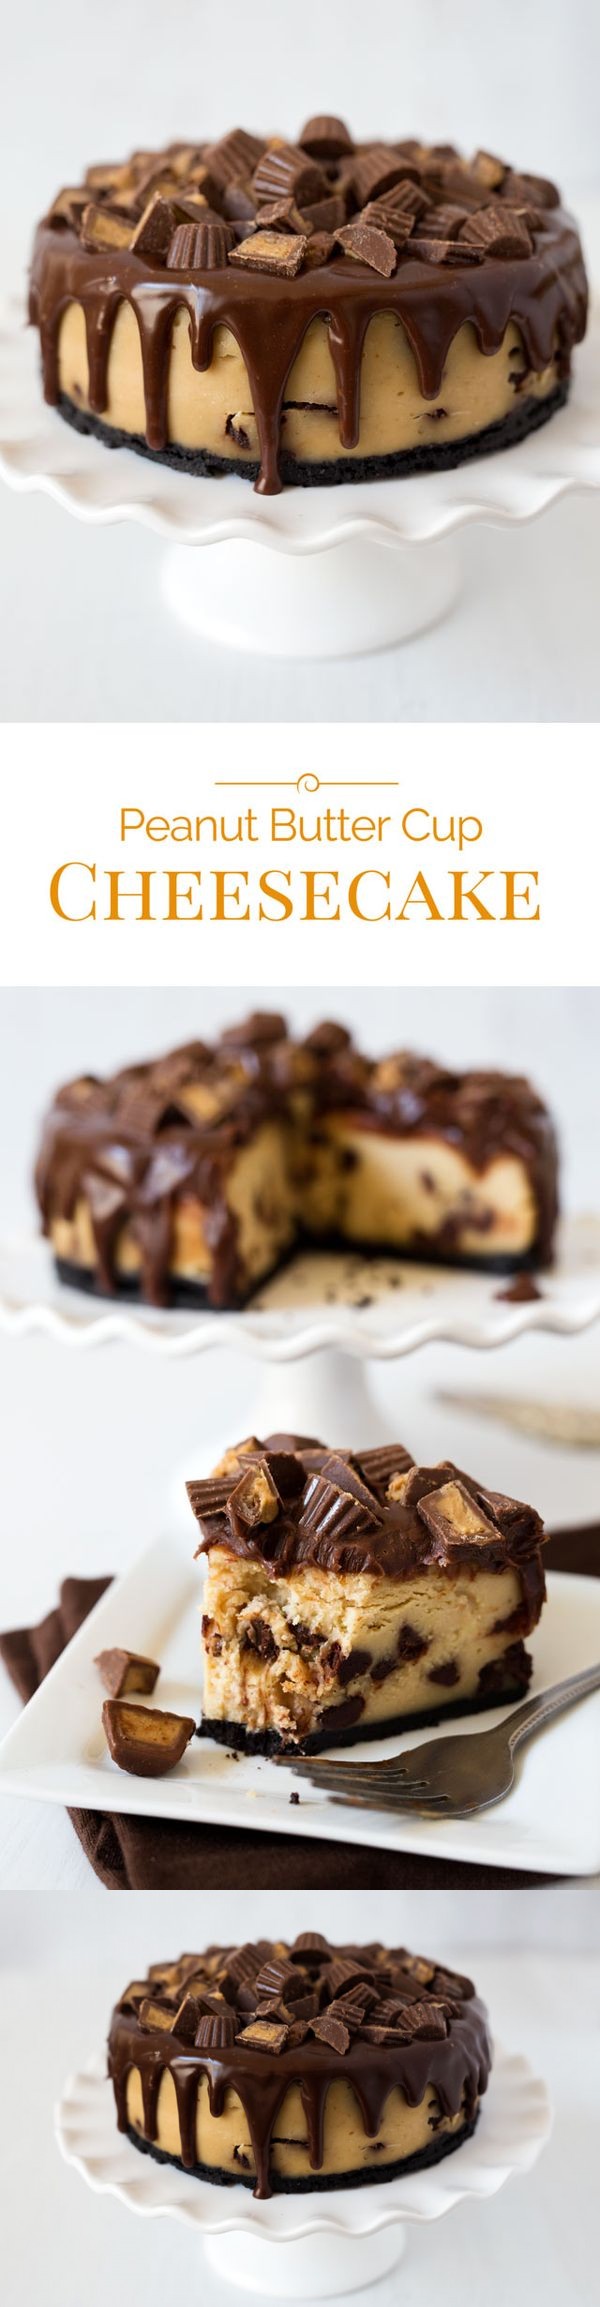 Pressure Cooker Peanut Butter Cup Cheesecake